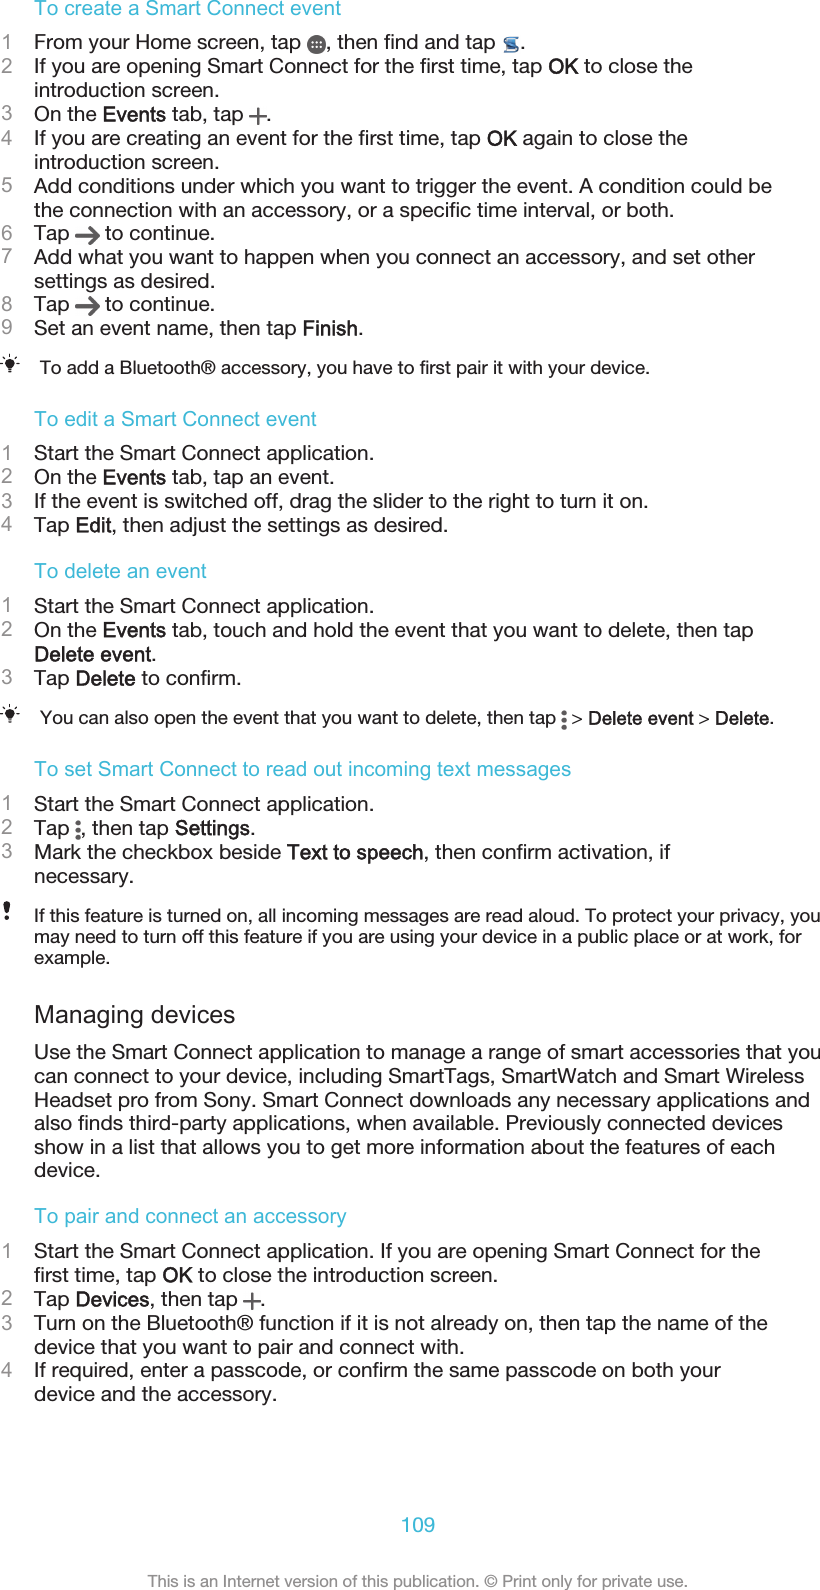 To create a Smart Connect event1From your Home screen, tap  , then find and tap  .2If you are opening Smart Connect for the first time, tap OK to close theintroduction screen.3On the Events tab, tap  .4If you are creating an event for the first time, tap OK again to close theintroduction screen.5Add conditions under which you want to trigger the event. A condition could bethe connection with an accessory, or a specific time interval, or both.6Tap   to continue.7Add what you want to happen when you connect an accessory, and set othersettings as desired.8Tap   to continue.9Set an event name, then tap Finish.To add a Bluetooth® accessory, you have to first pair it with your device.To edit a Smart Connect event1Start the Smart Connect application.2On the Events tab, tap an event.3If the event is switched off, drag the slider to the right to turn it on.4Tap Edit, then adjust the settings as desired.To delete an event1Start the Smart Connect application.2On the Events tab, touch and hold the event that you want to delete, then tapDelete event.3Tap Delete to confirm.You can also open the event that you want to delete, then tap   &gt; Delete event &gt; Delete.To set Smart Connect to read out incoming text messages1Start the Smart Connect application.2Tap  , then tap Settings.3Mark the checkbox beside Text to speech, then confirm activation, ifnecessary.If this feature is turned on, all incoming messages are read aloud. To protect your privacy, youmay need to turn off this feature if you are using your device in a public place or at work, forexample.Managing devicesUse the Smart Connect application to manage a range of smart accessories that youcan connect to your device, including SmartTags, SmartWatch and Smart WirelessHeadset pro from Sony. Smart Connect downloads any necessary applications andalso finds third-party applications, when available. Previously connected devicesshow in a list that allows you to get more information about the features of eachdevice.To pair and connect an accessory1Start the Smart Connect application. If you are opening Smart Connect for thefirst time, tap OK to close the introduction screen.2Tap Devices, then tap  .3Turn on the Bluetooth® function if it is not already on, then tap the name of thedevice that you want to pair and connect with.4If required, enter a passcode, or confirm the same passcode on both yourdevice and the accessory.109This is an Internet version of this publication. © Print only for private use.